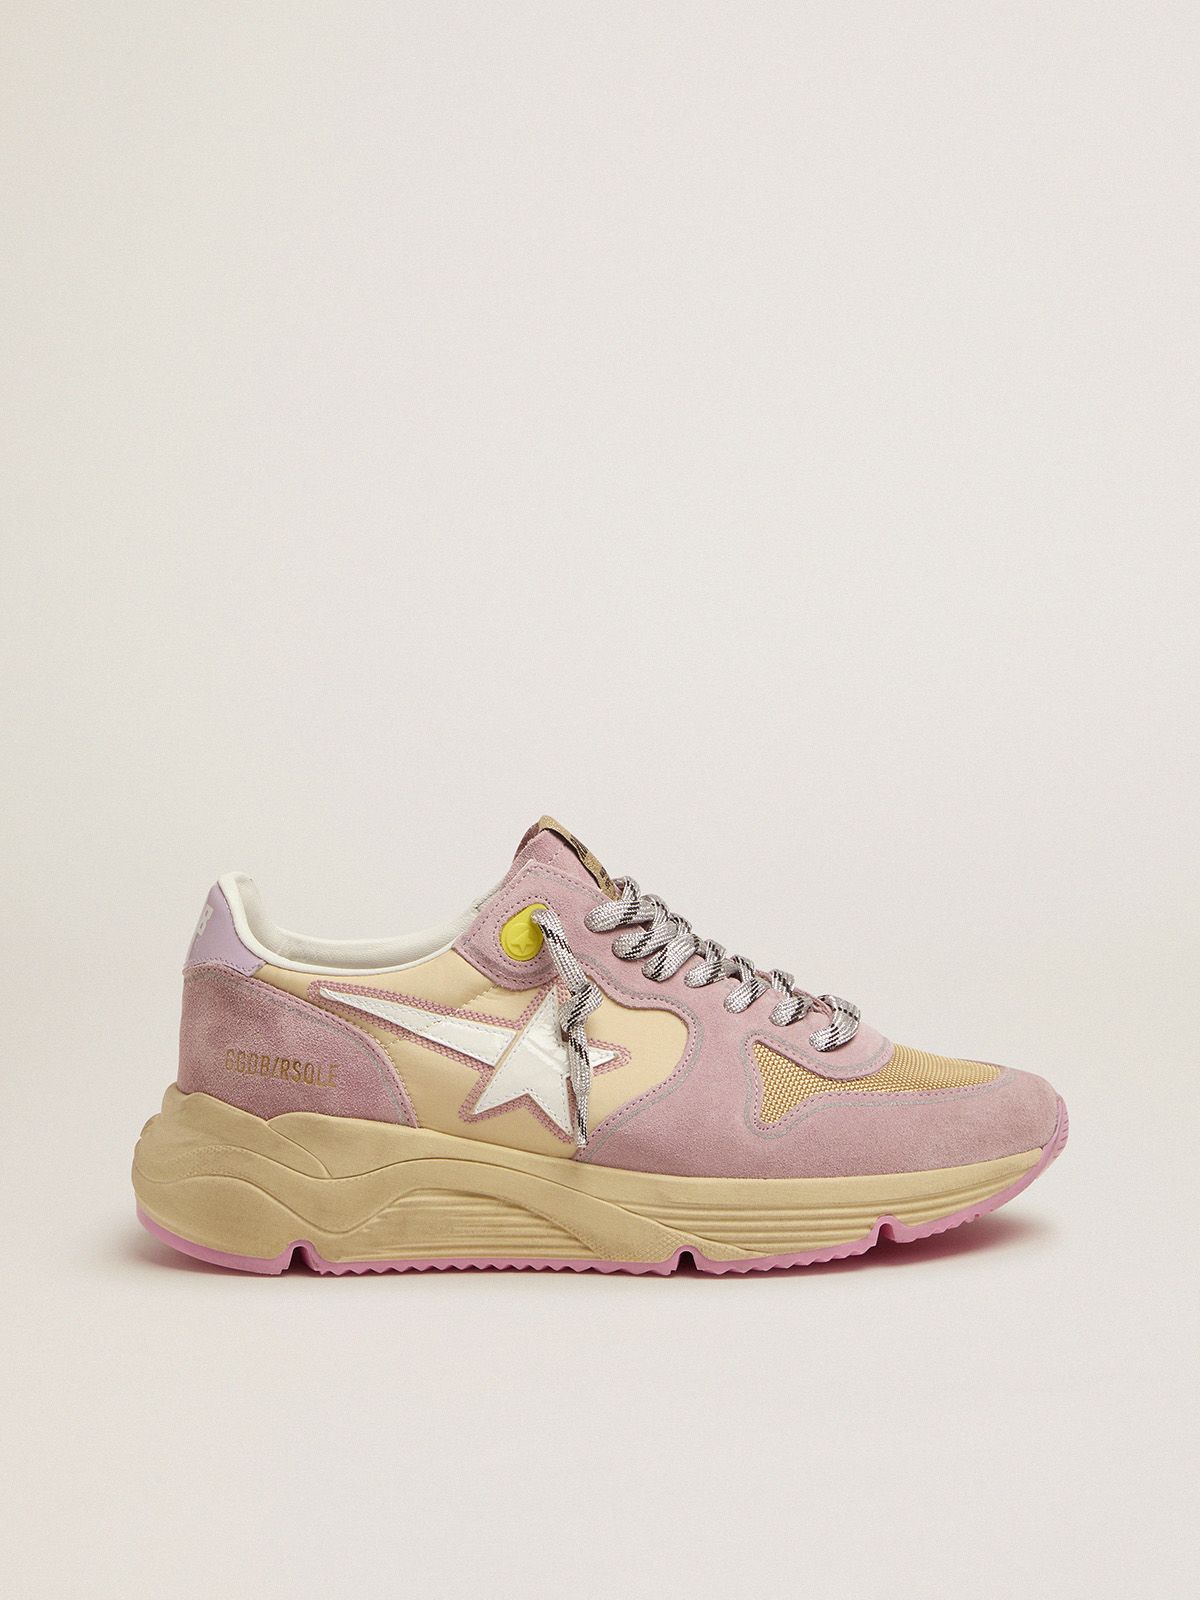 golden goose pink Pastel white Running Sole with sneakers star